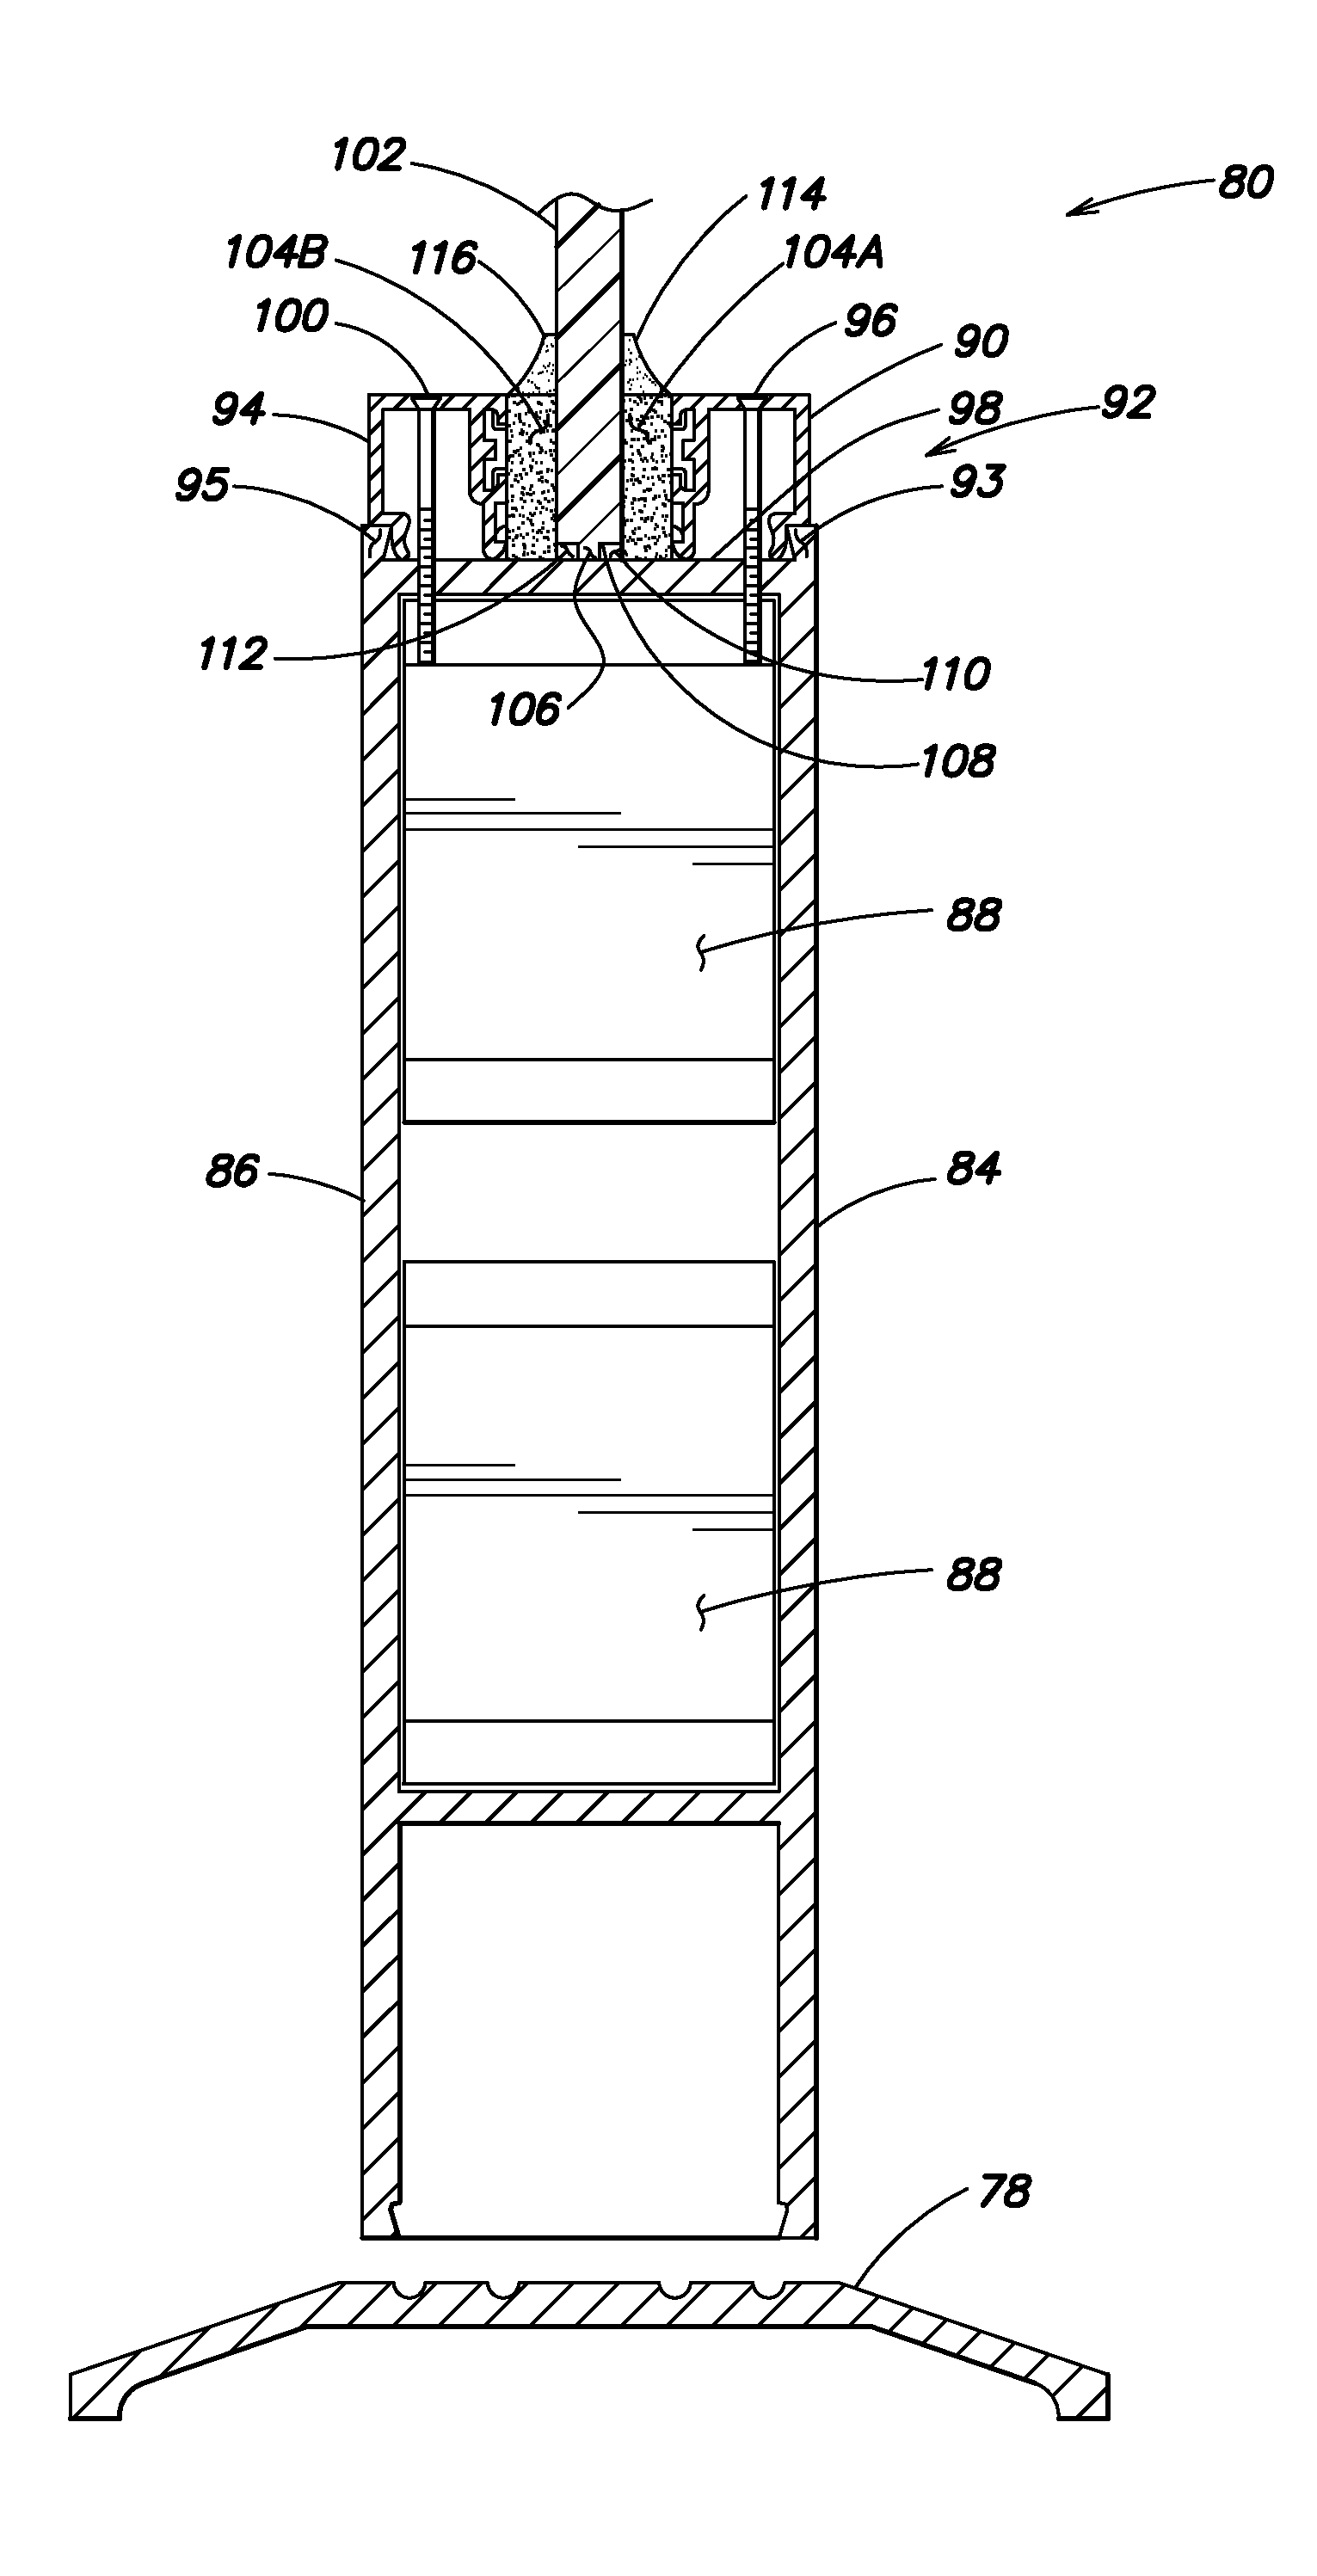 Shatter-resistant, optically-transparent panels and methods of use of the panels for on-site retrofitting and reinforcing of passageways